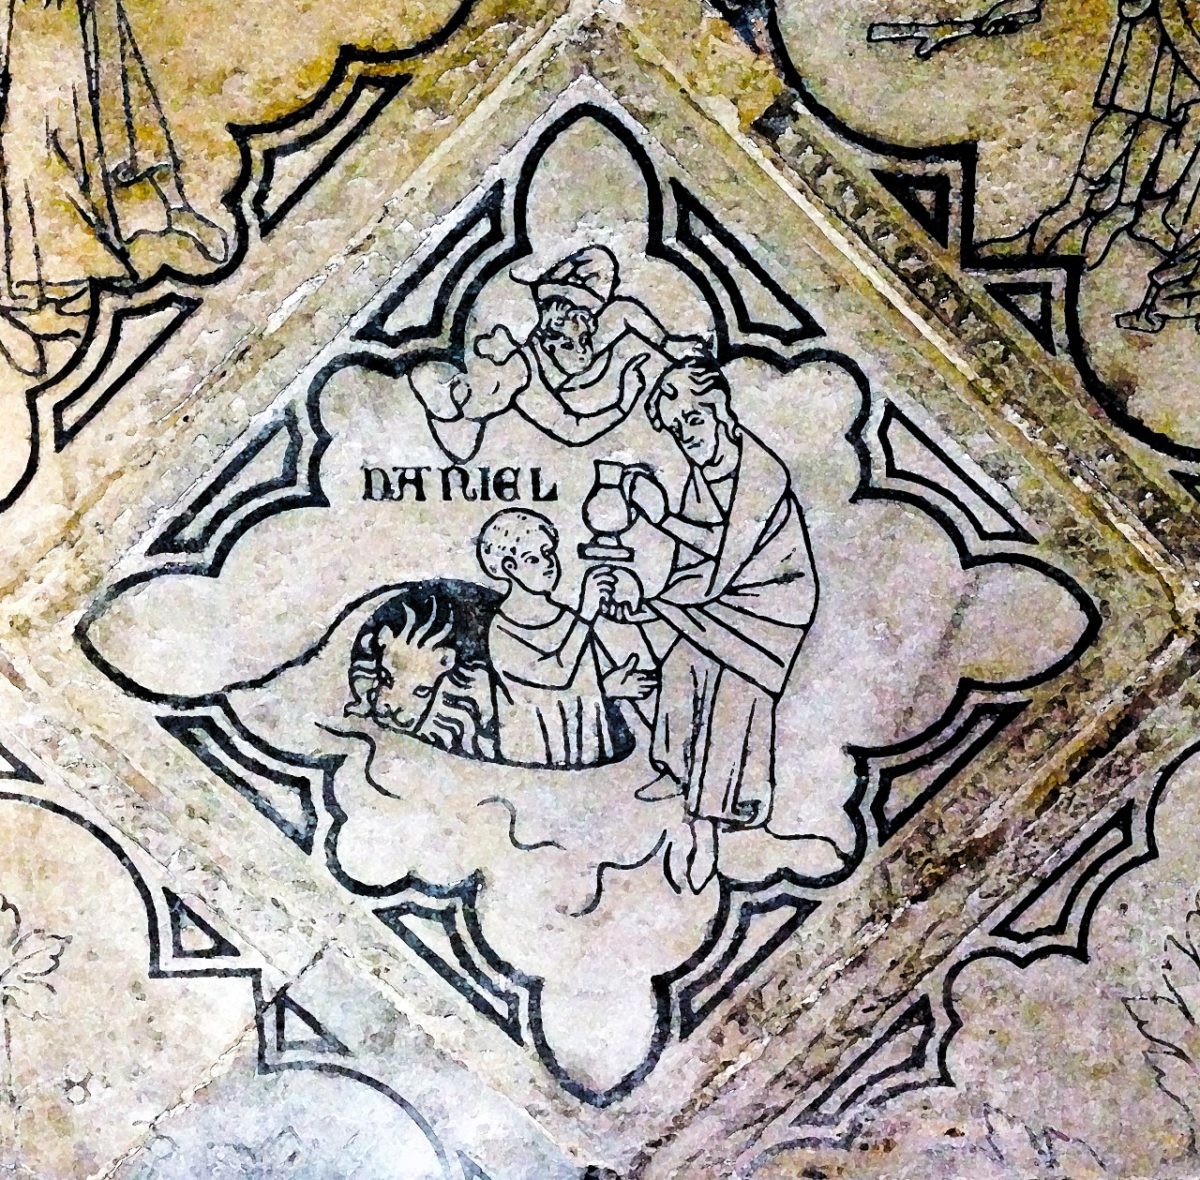 A close-up image of highly decorative detailing from a medieval manuscript.